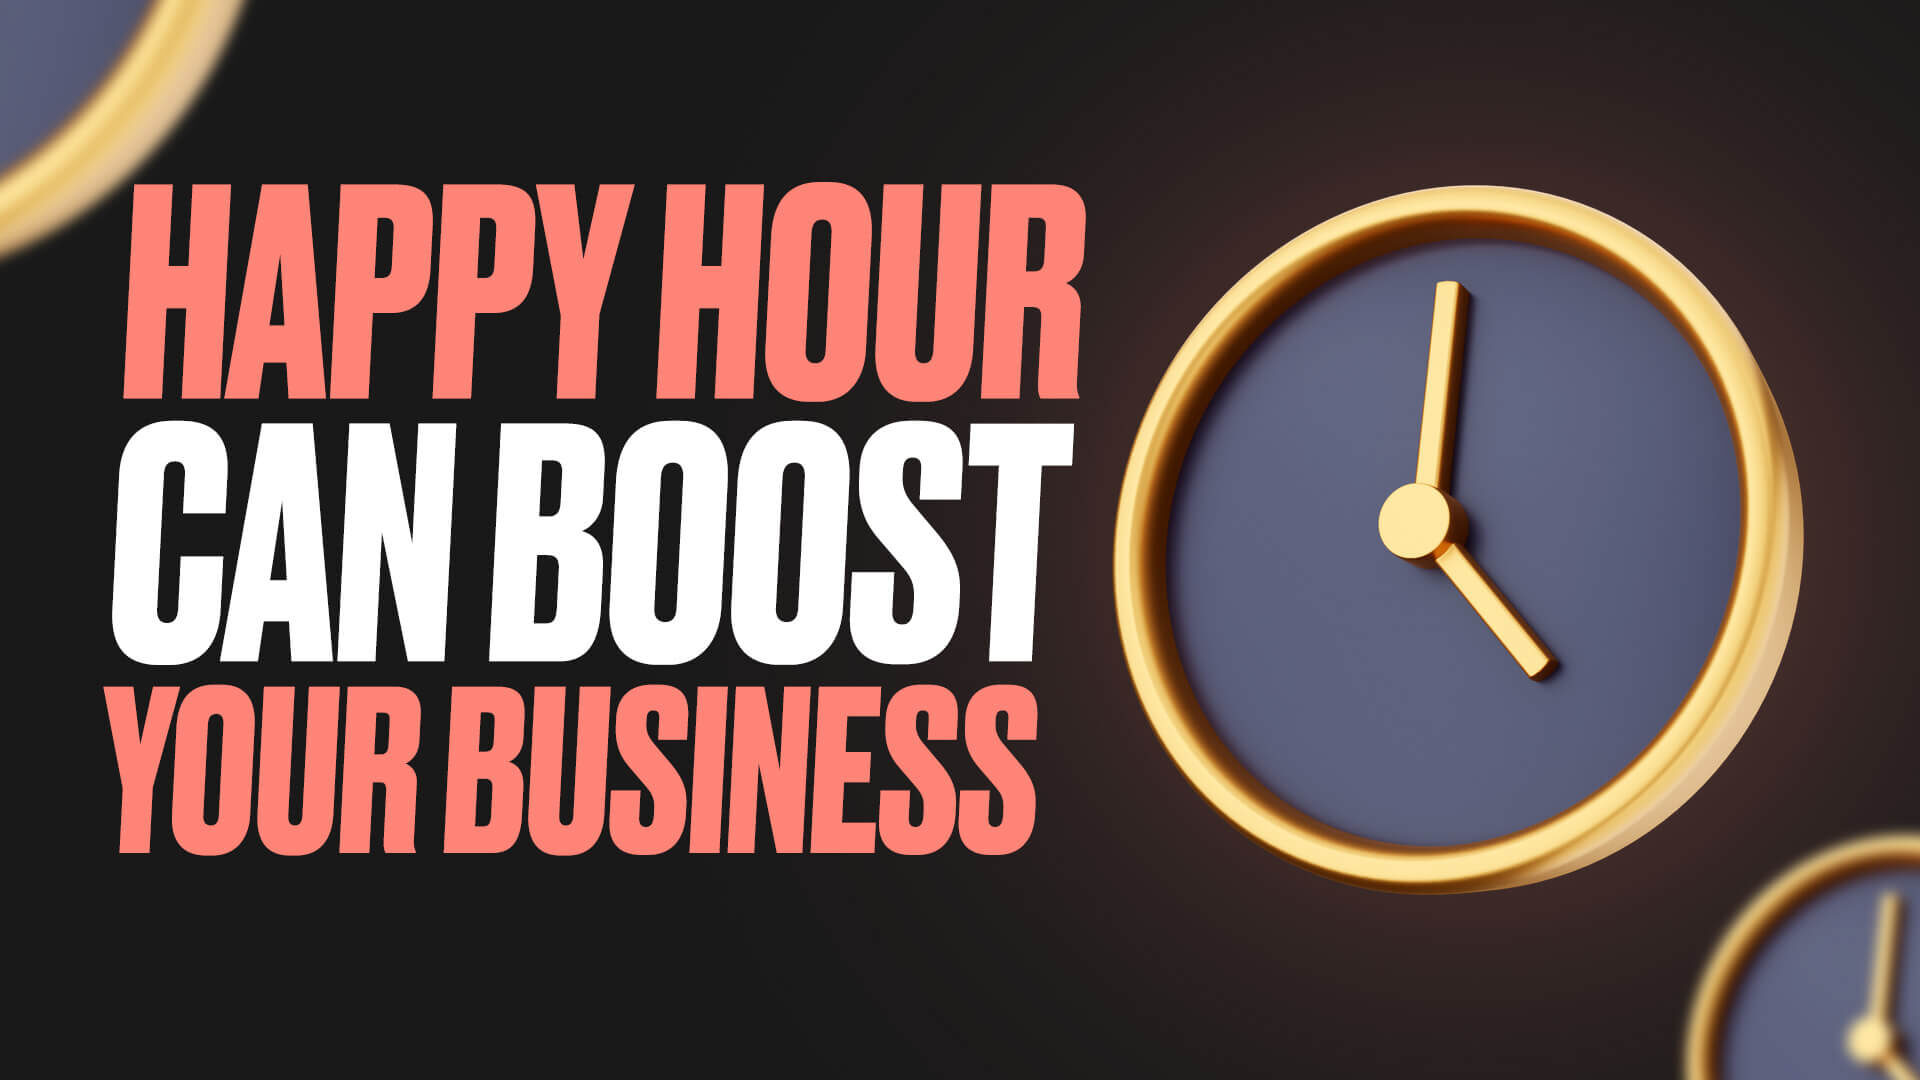 How Happy Hour Can Boost Your Business